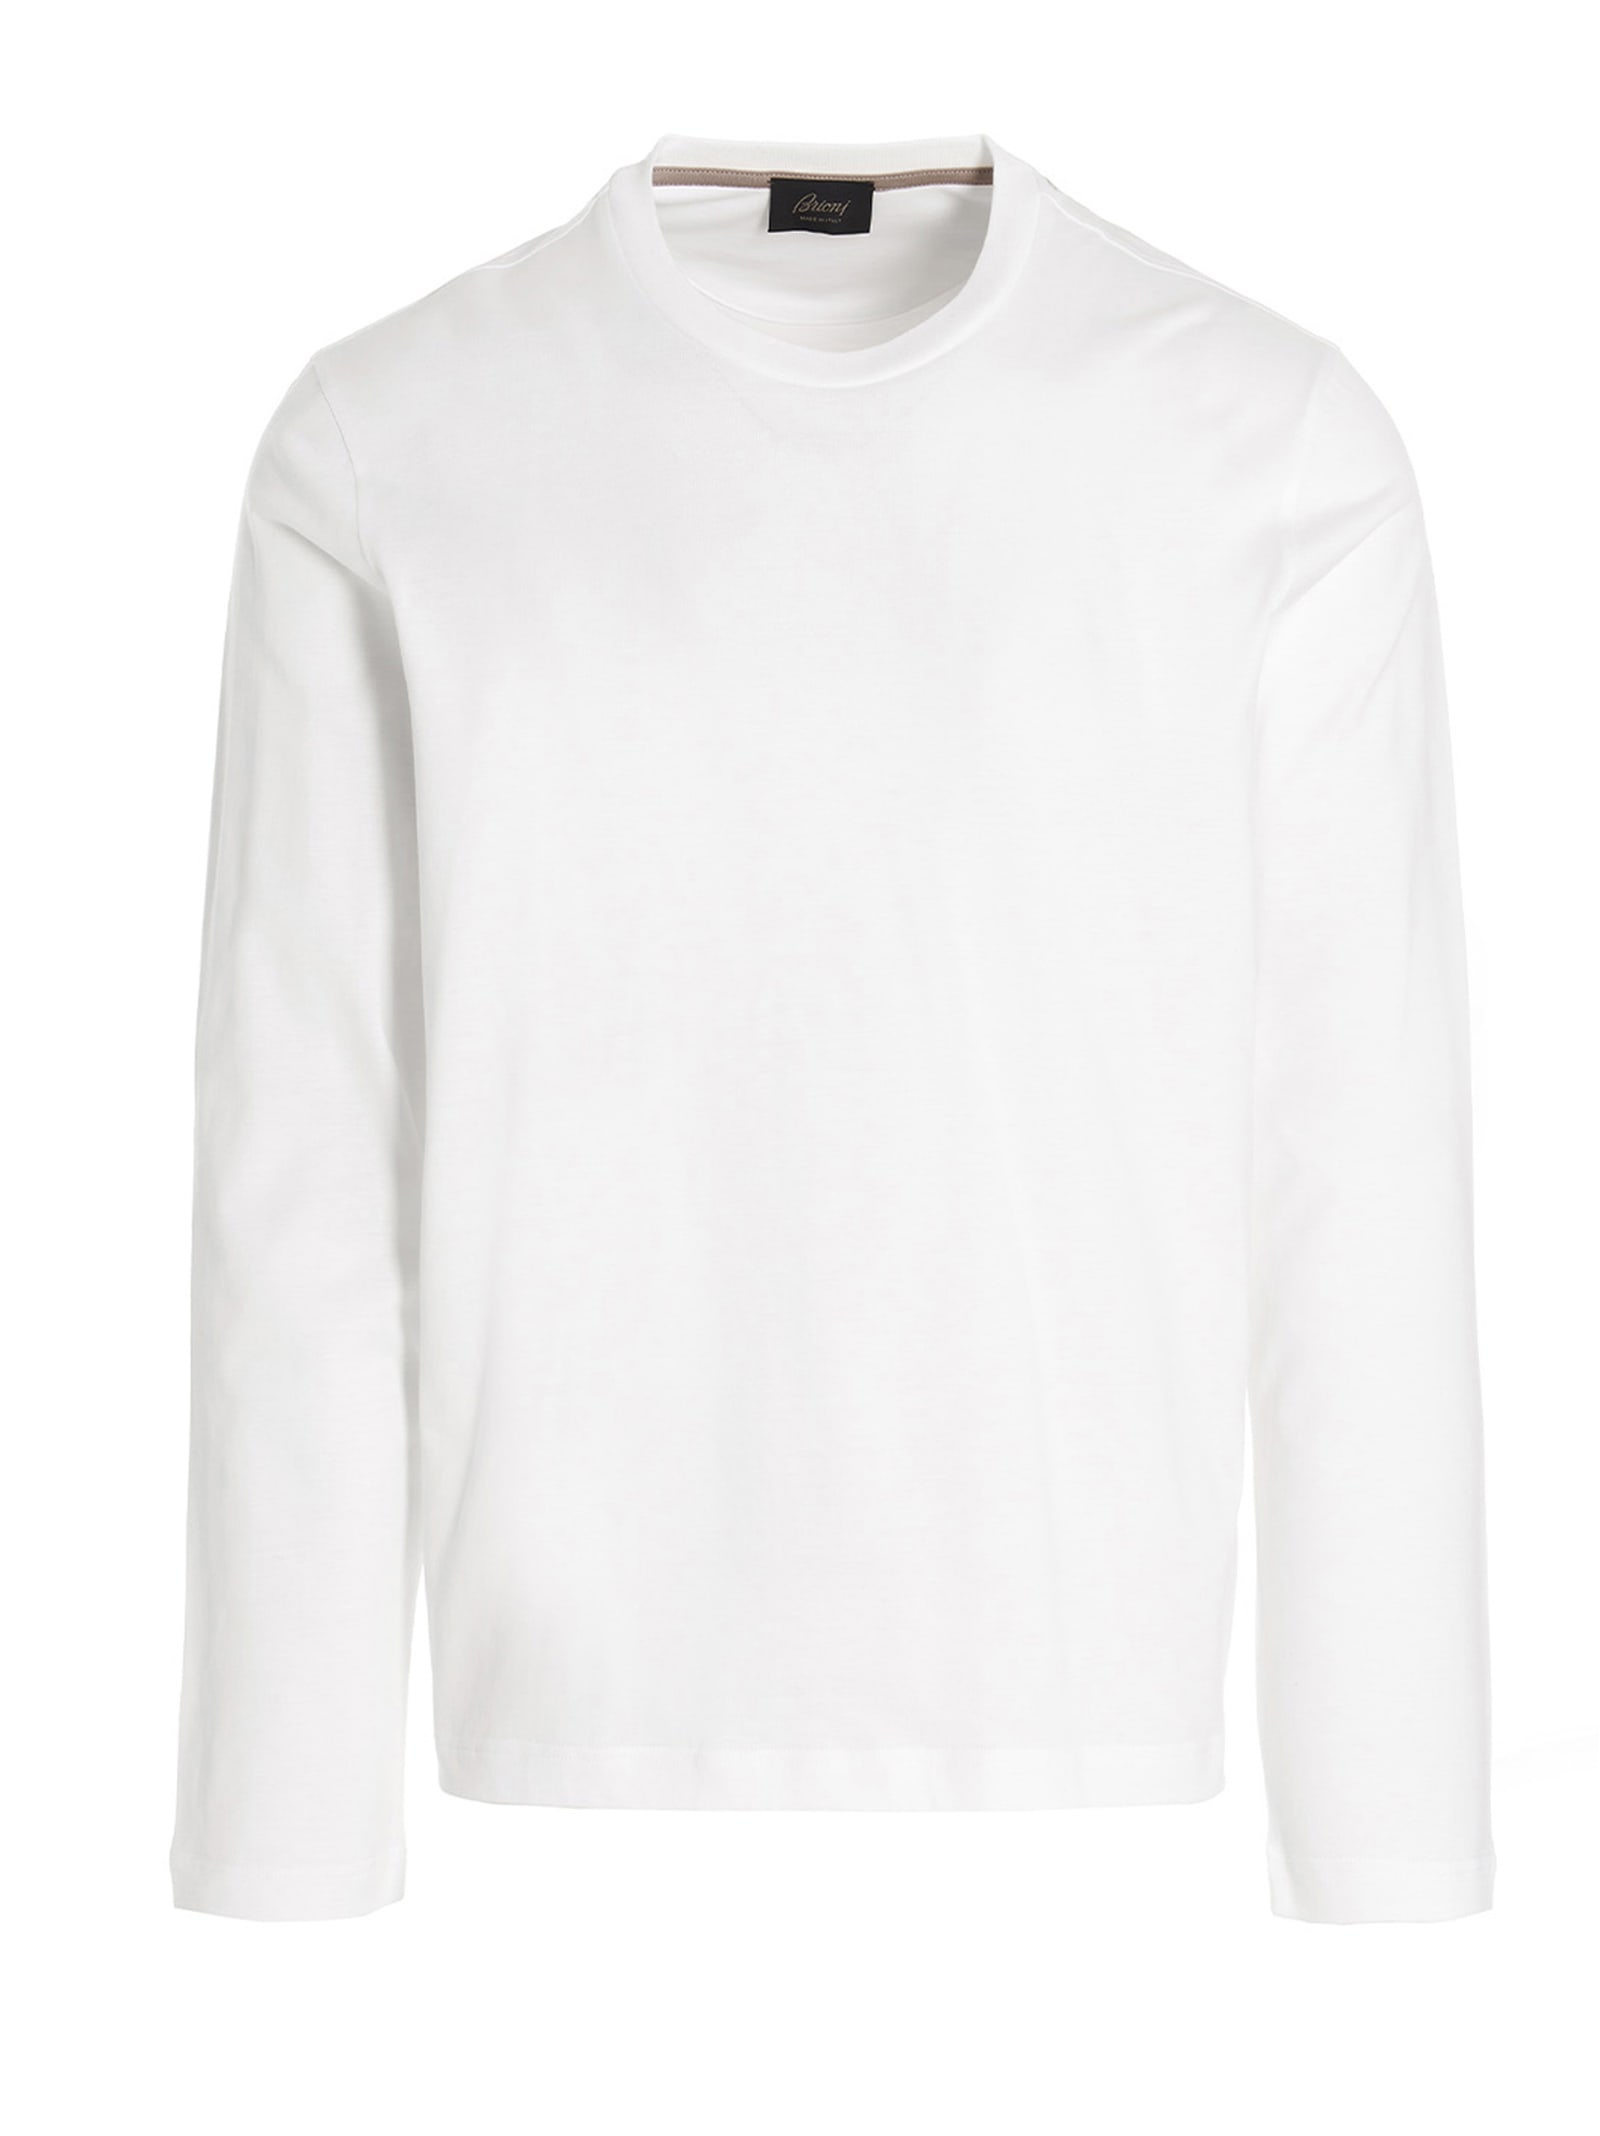 Brioni Logo Embroidery T-shirt